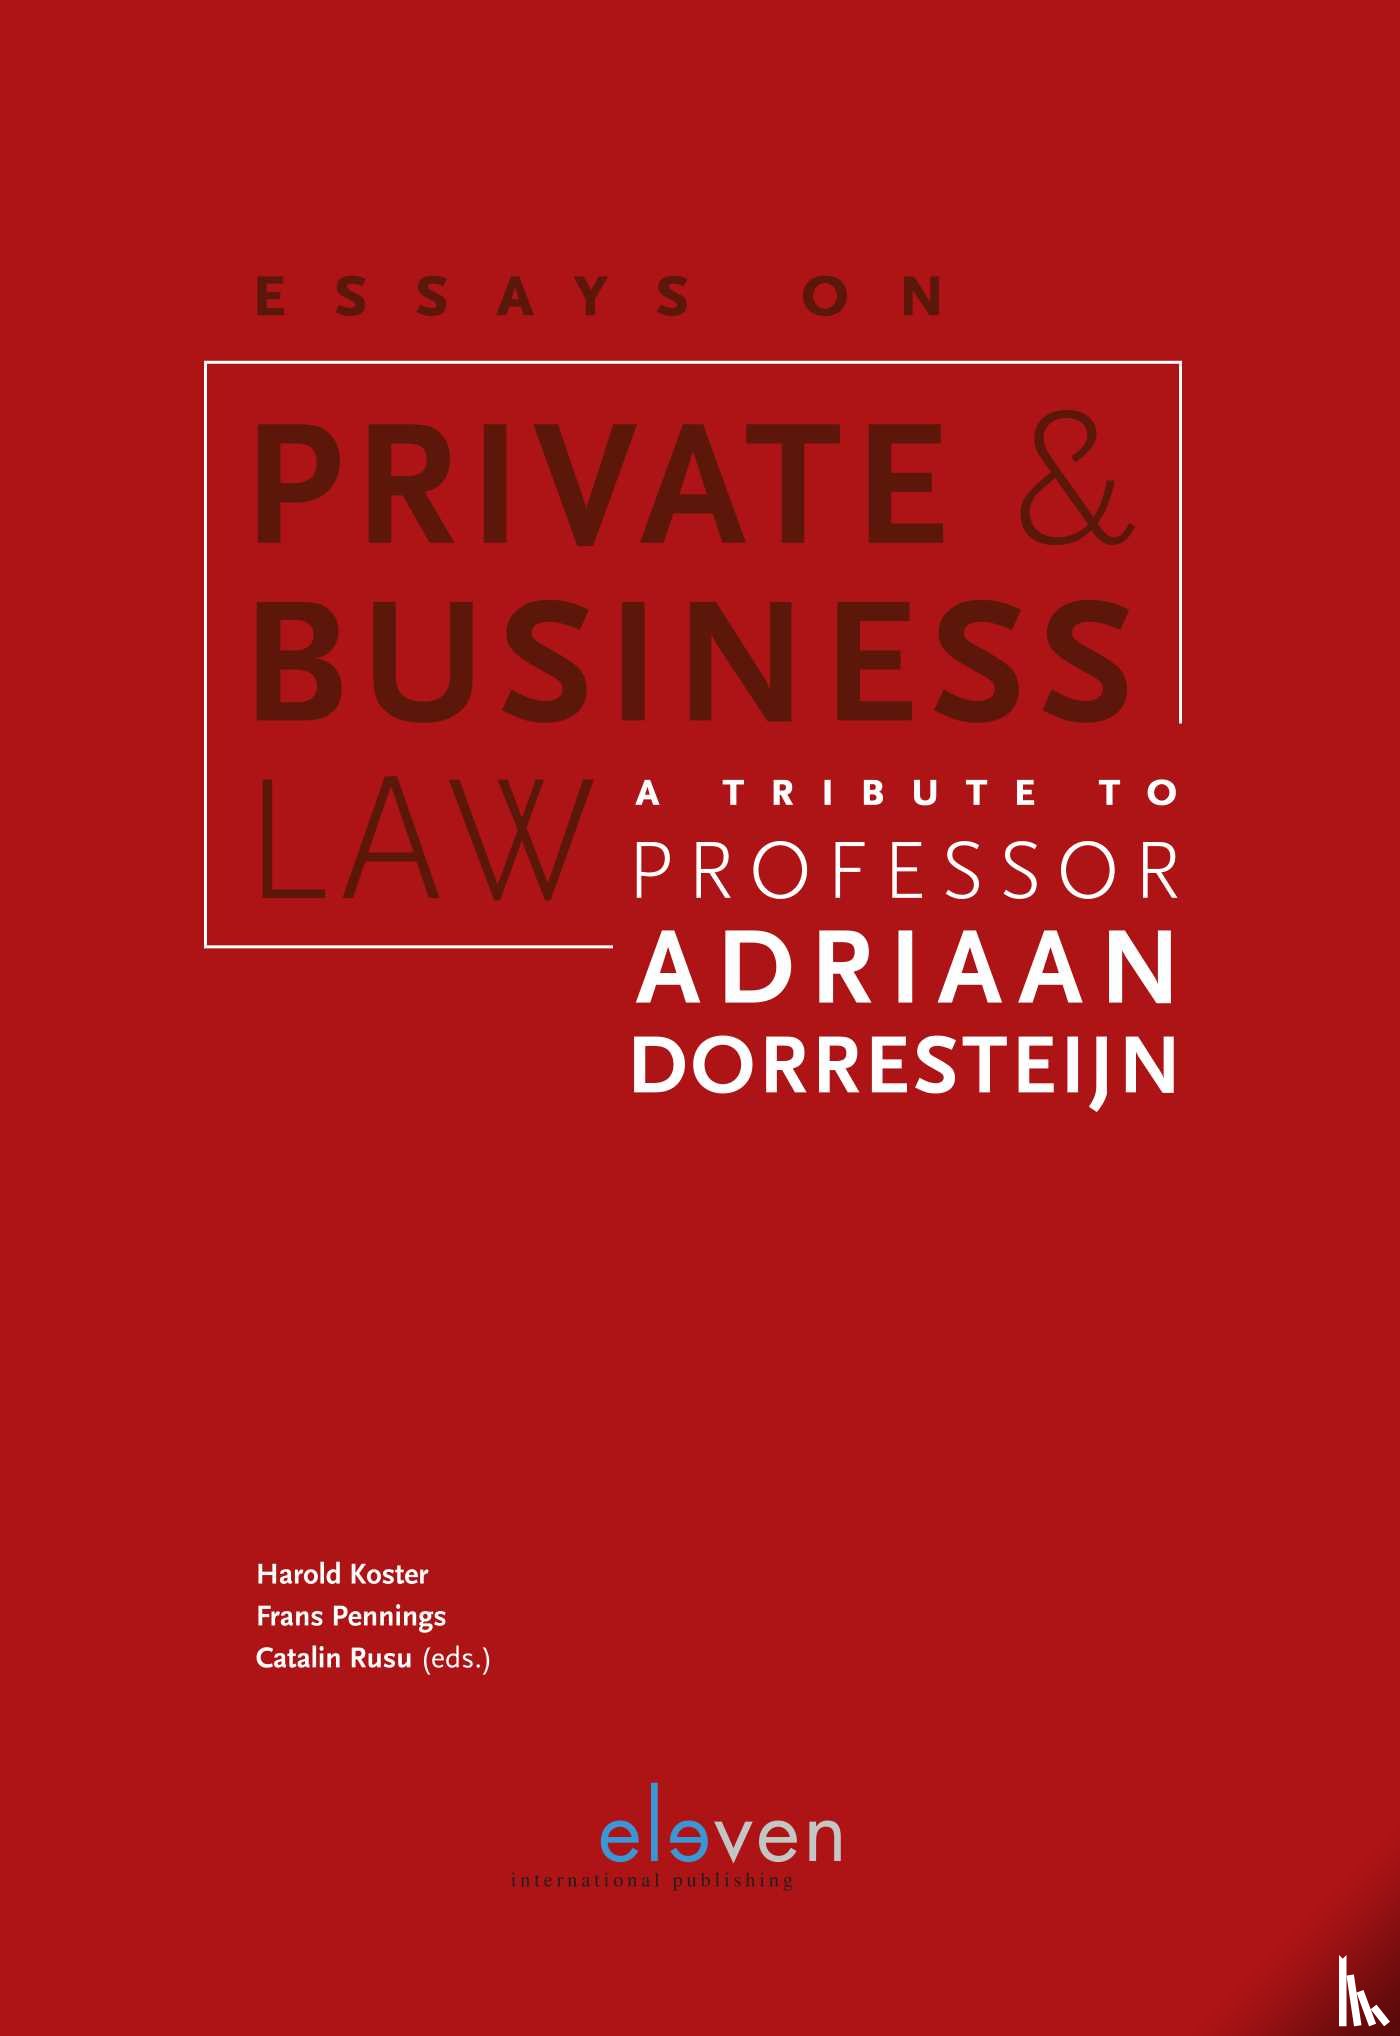  - Essays on Private & Business Law